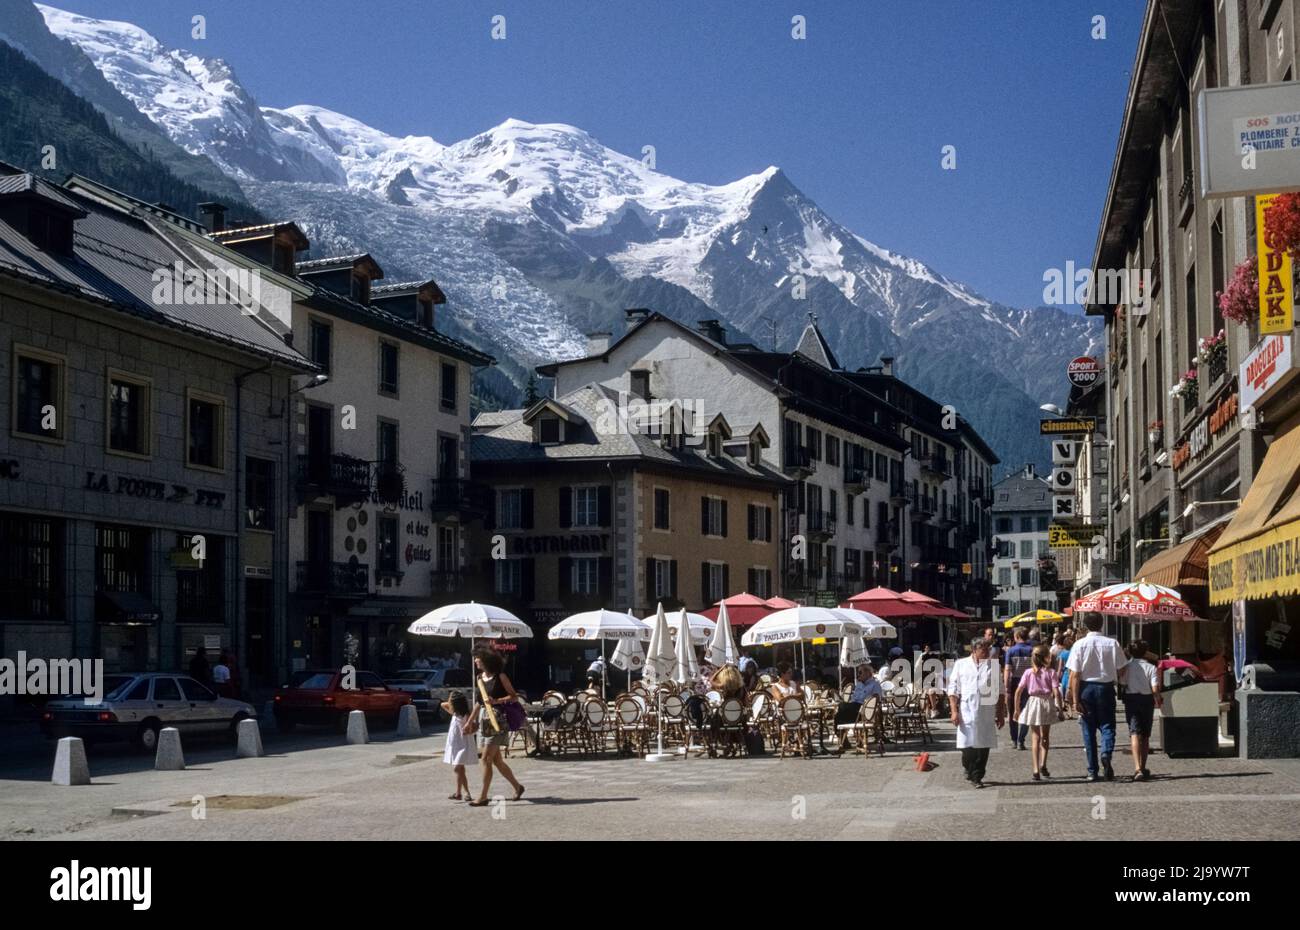 Cafes with parasols, passers-by and cars. The Mont Blanc massif with Dôme du Gouter in the background. Place Balmat, Chamonix-Mont-Blanc, France 1990 Stock Photo